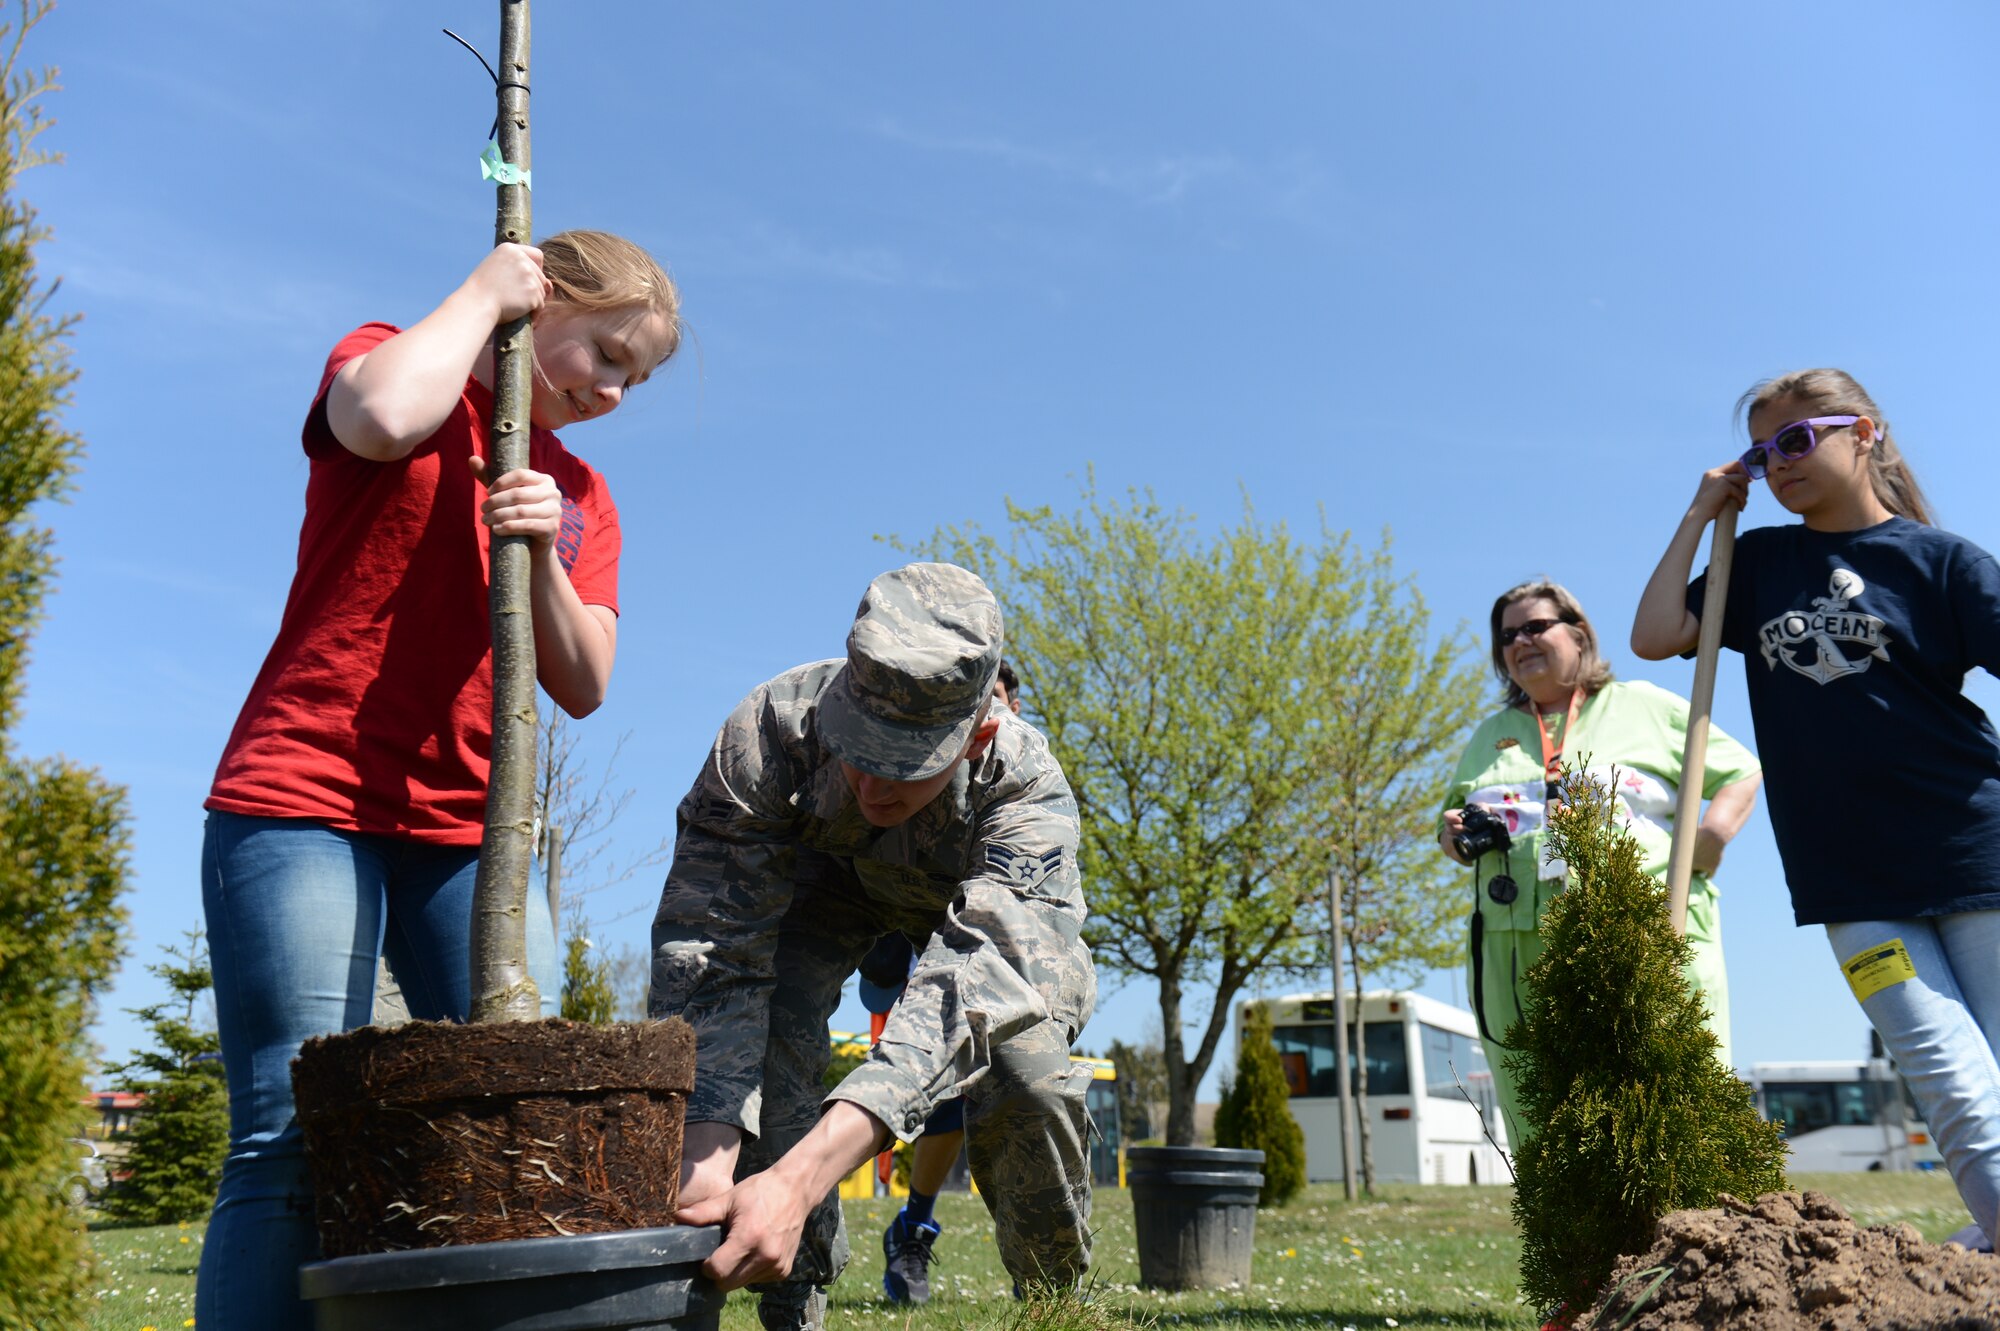 Students from Spangdahlem Middle School and local girl scouts took part in the annual Earth Week tree planting at Spangdahlem Air Base, Germany, April 24, 2015. Four trees were planted this year as part of the environmental awareness event. (U.S. Air force photo by Senior Airman Sarah Denewellis/Released)  